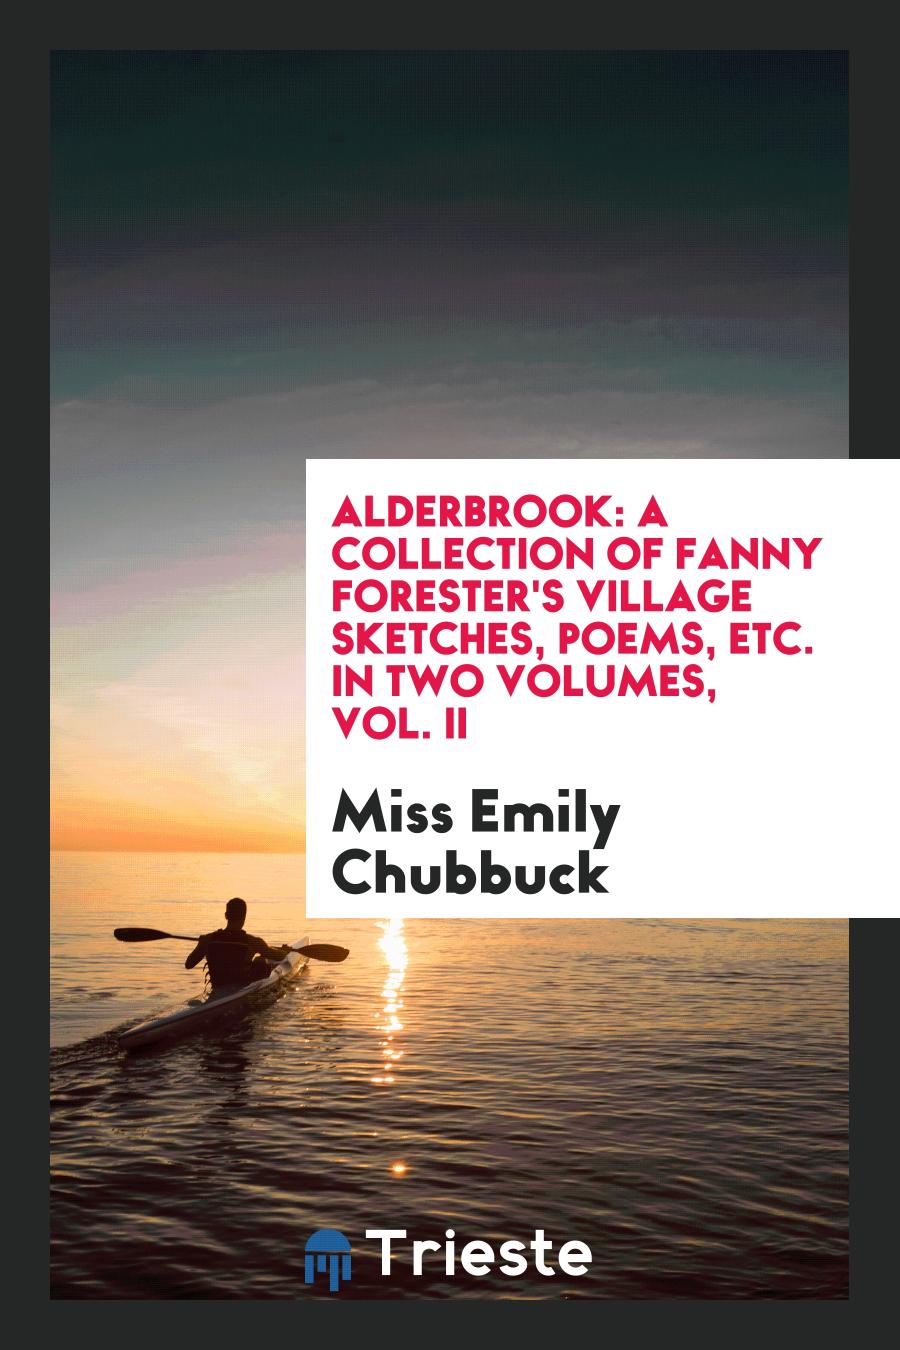 Alderbrook: A Collection of Fanny Forester's Village Sketches, Poems, Etc. In Two Volumes, Vol. II